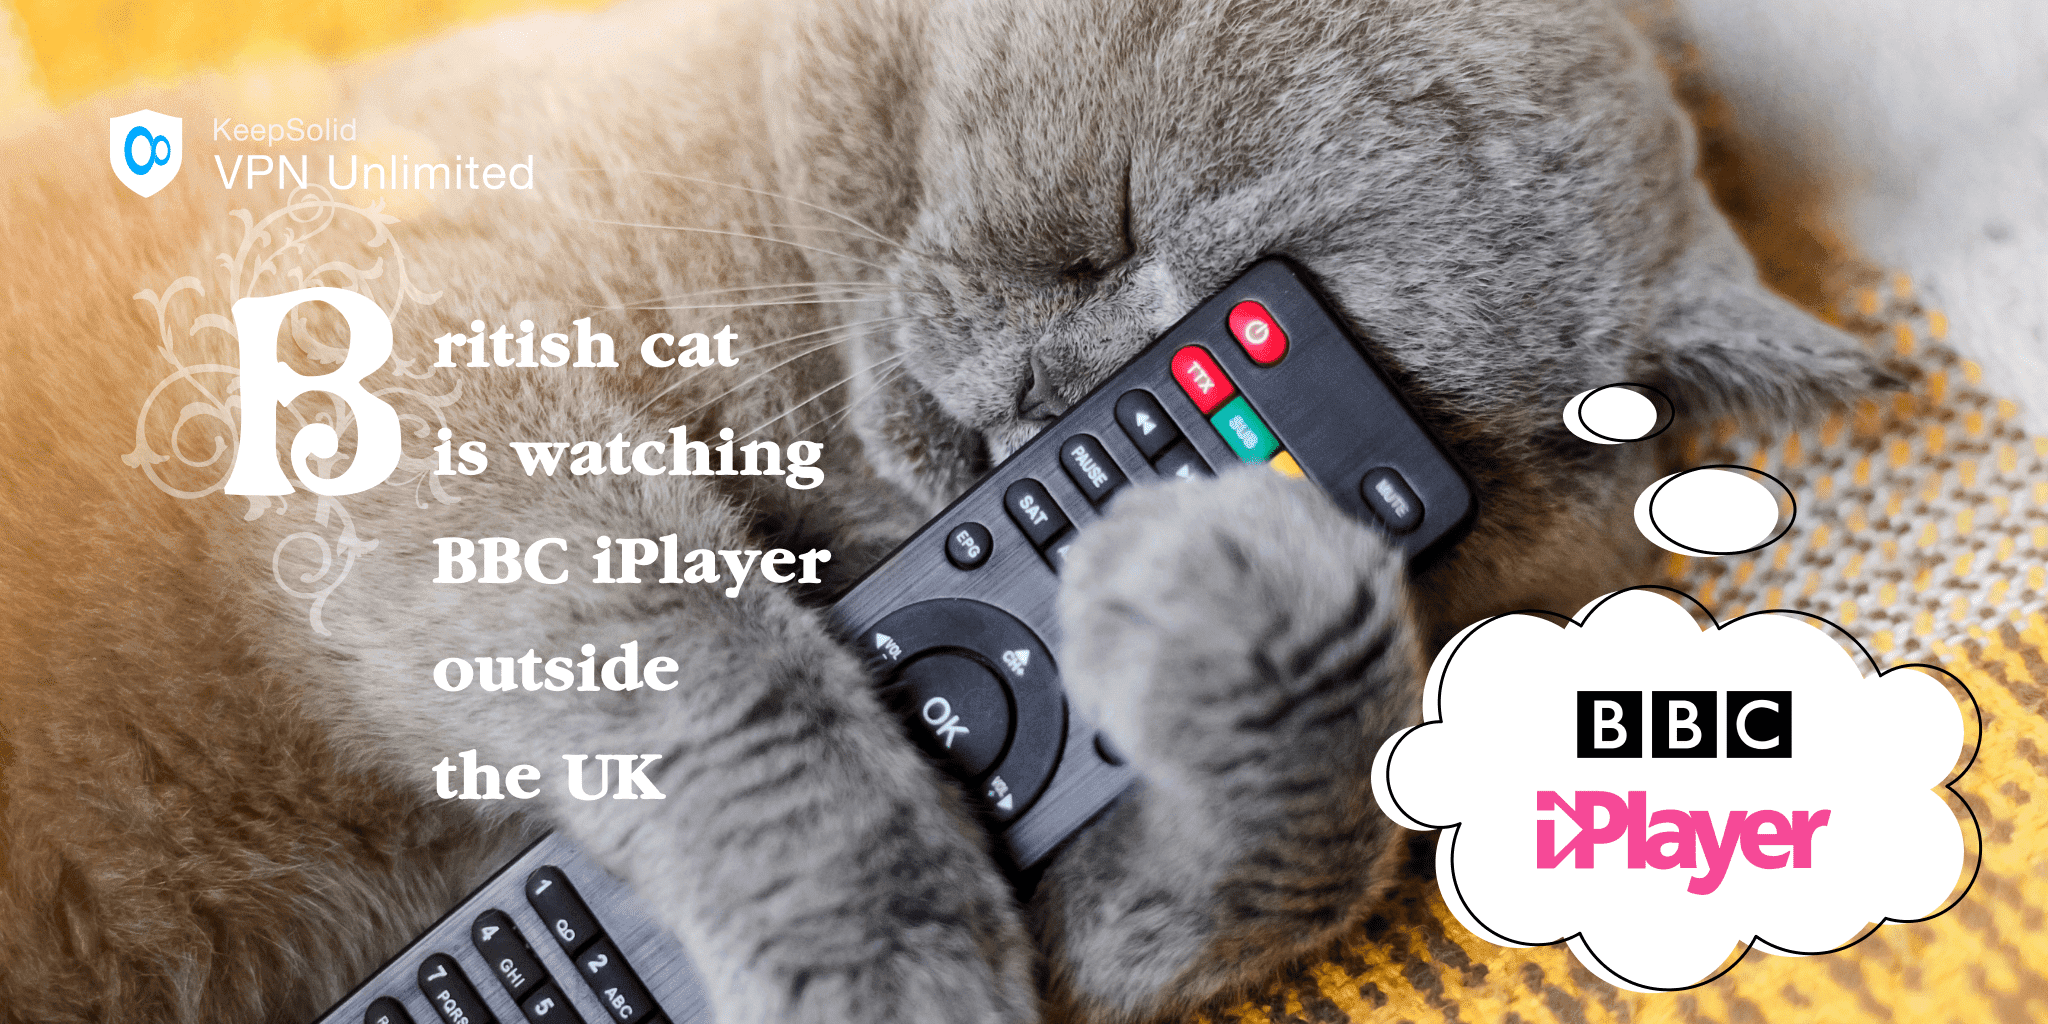 British cat sleeping with a TV remote after watch BBC iPlayer with VPN Unlimited